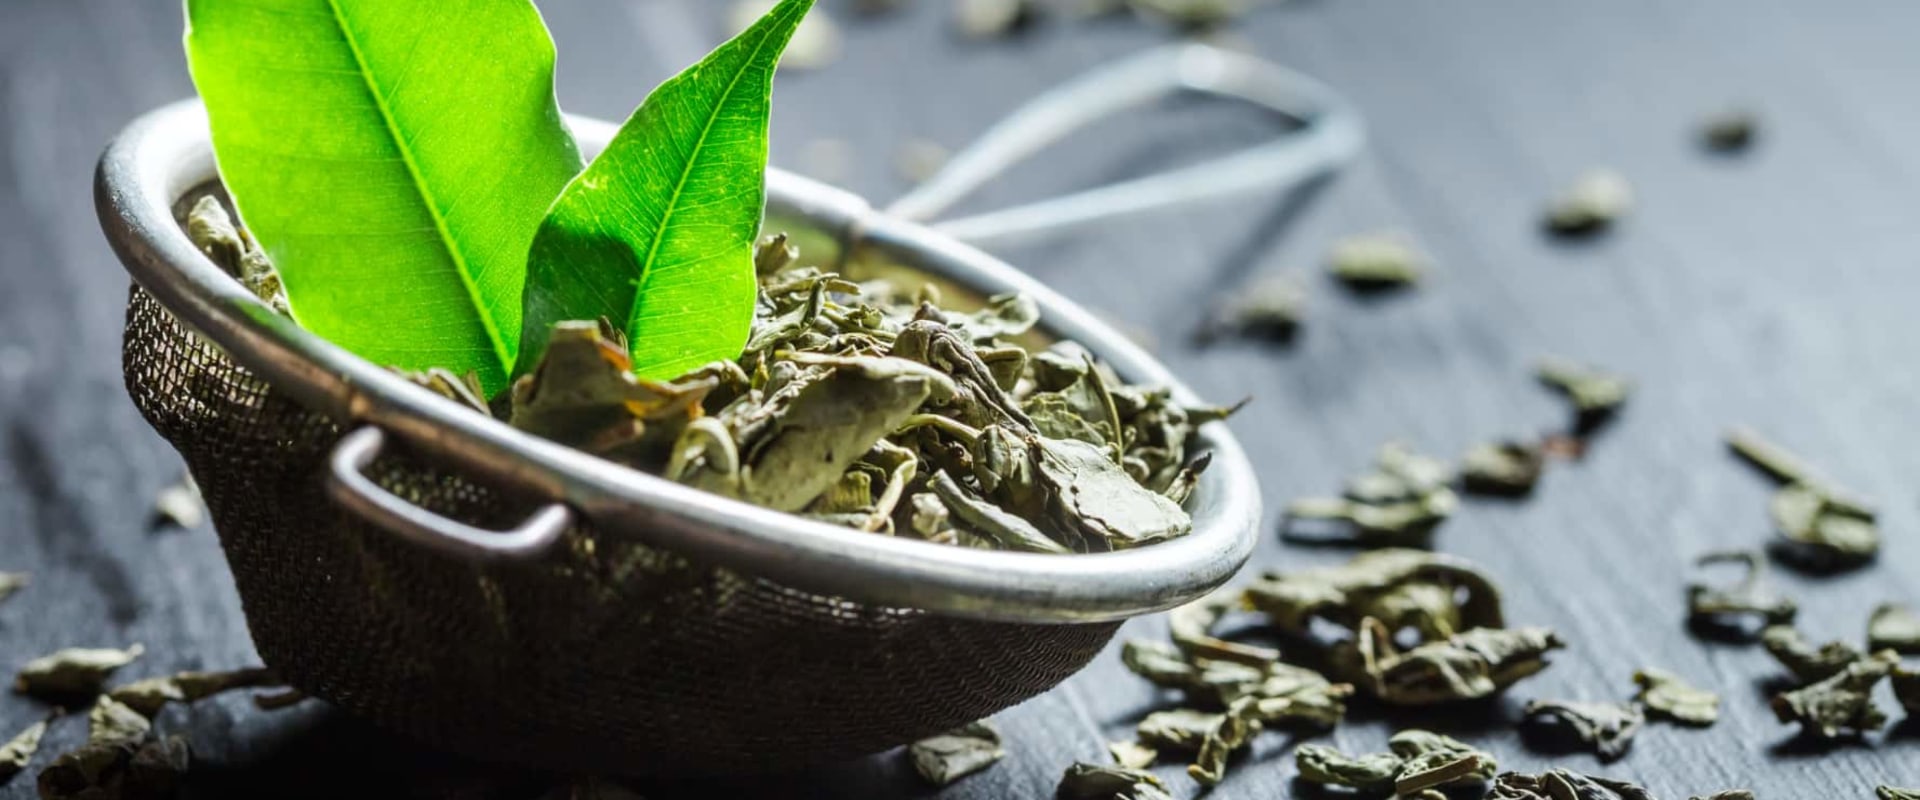 Green Tea Extract: Benefits, Uses, and Safety